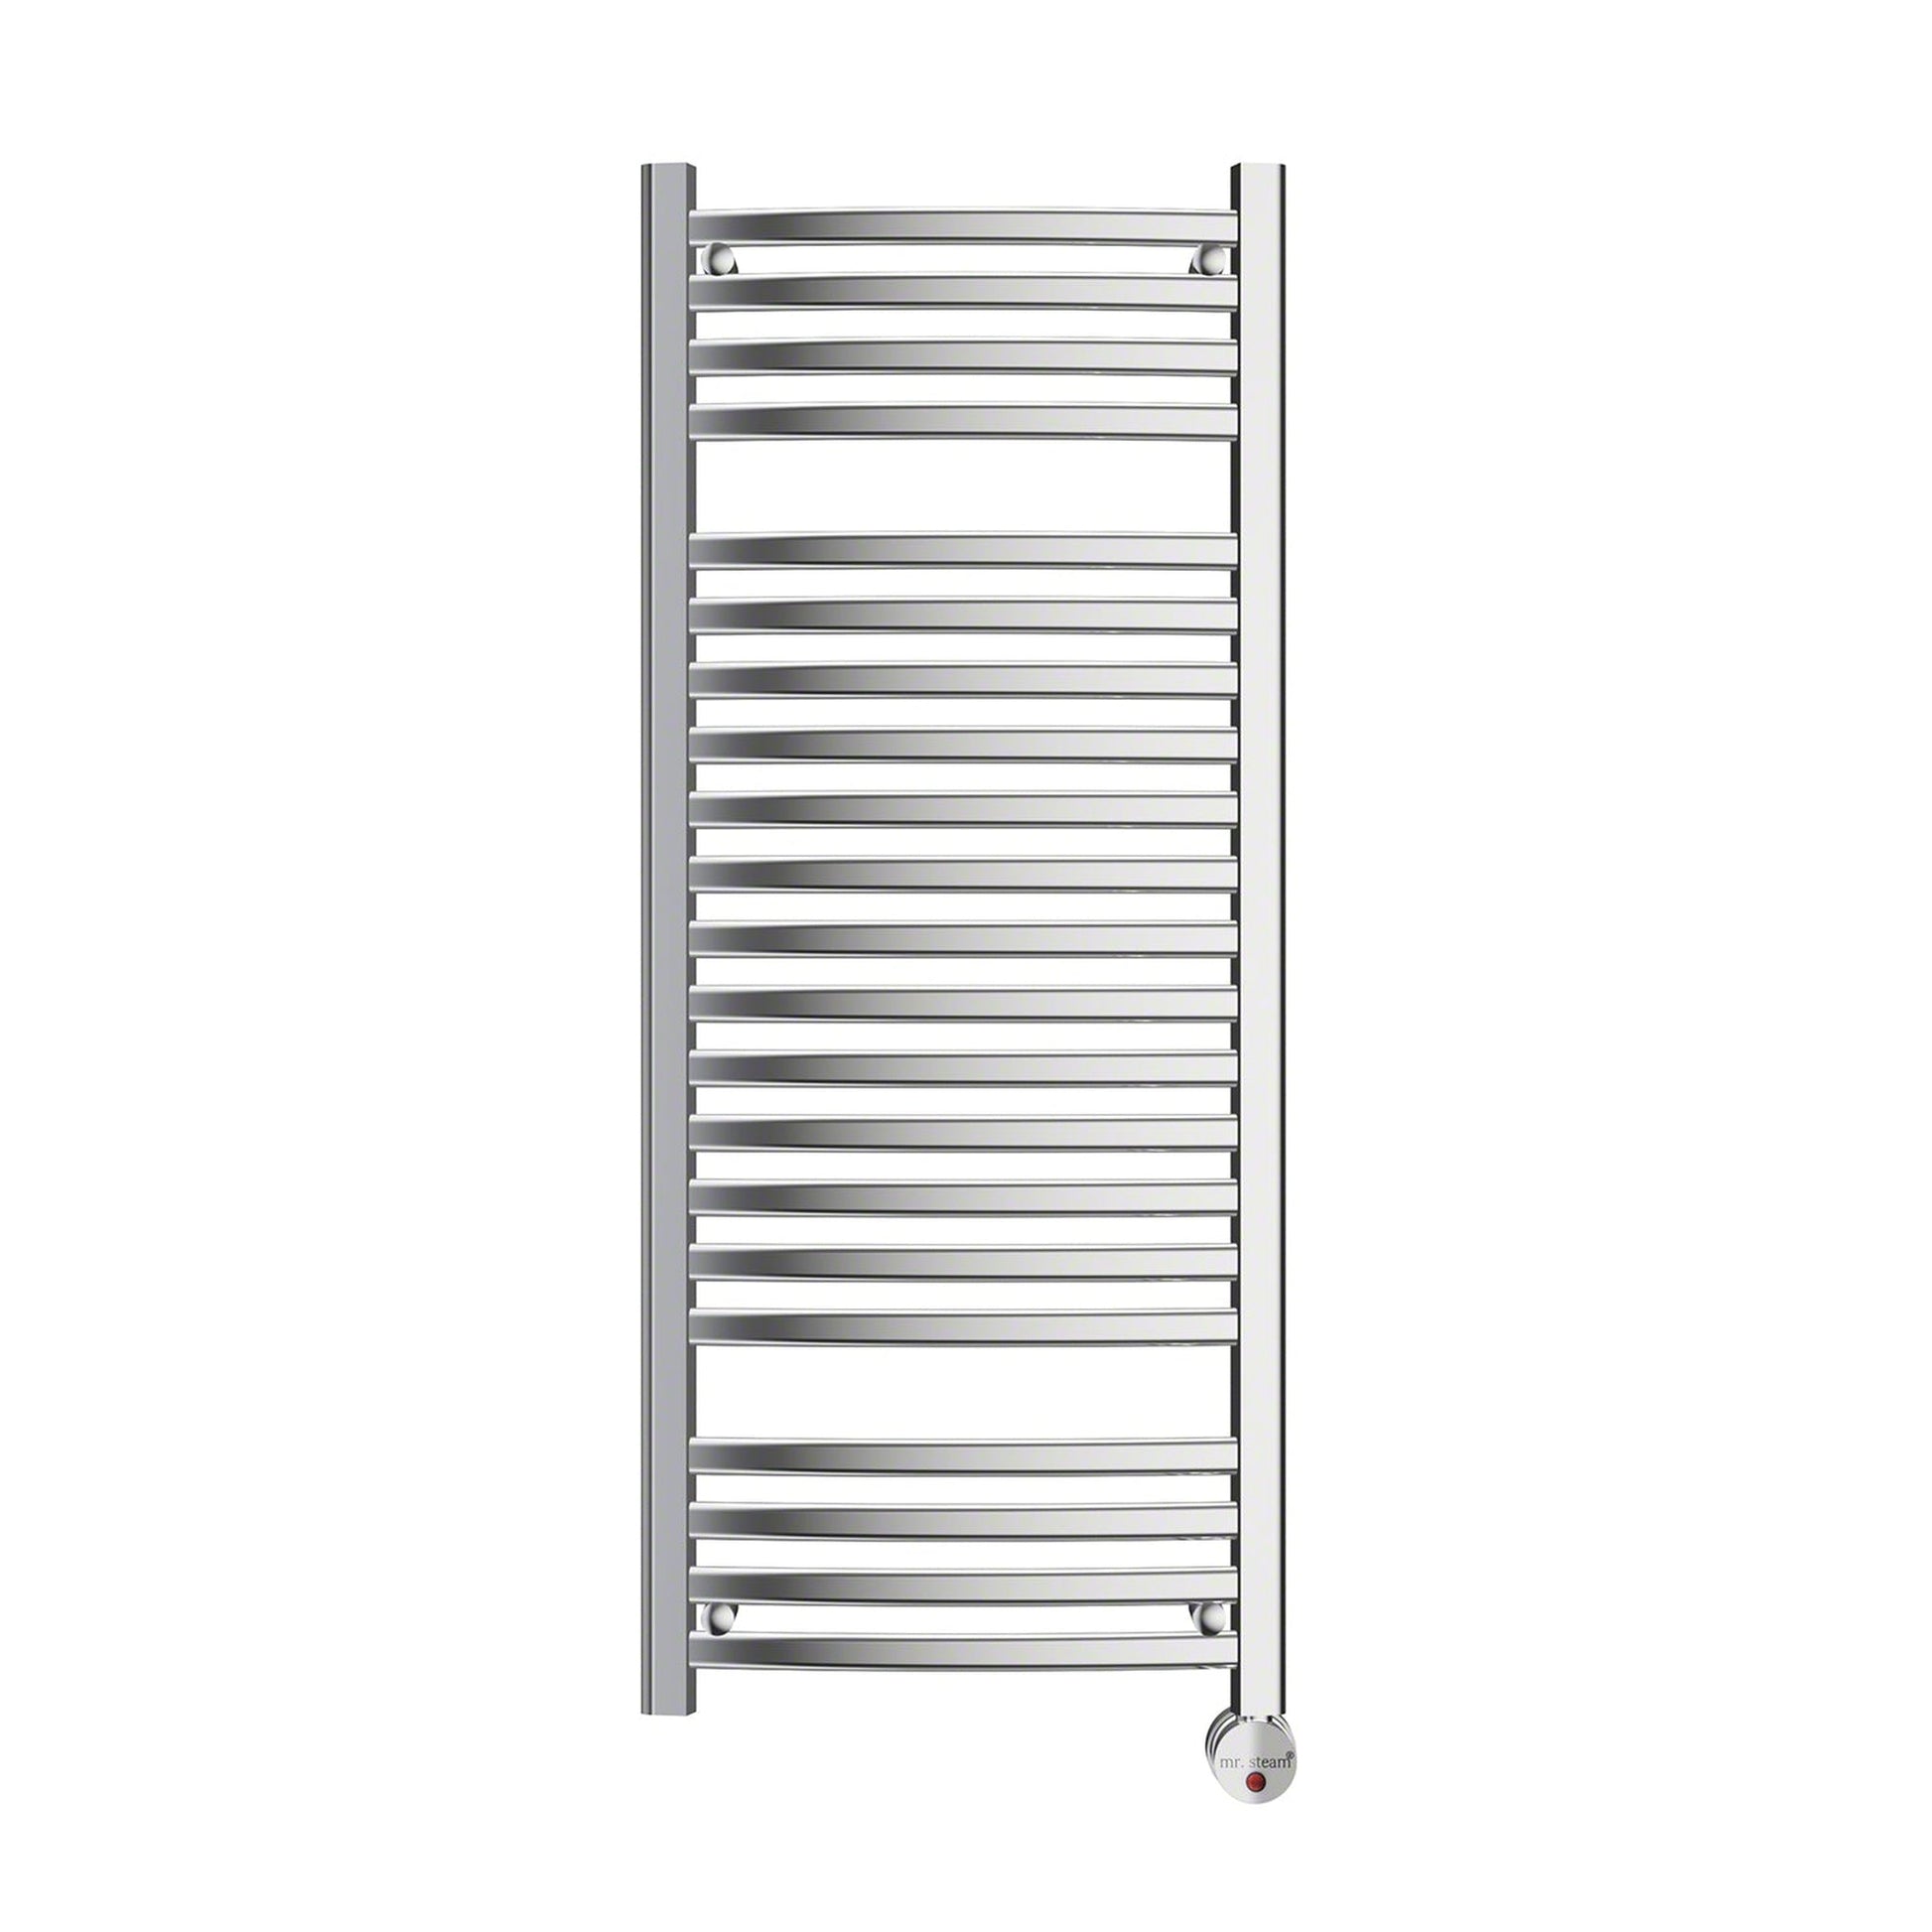 MrSteam Broadway Collection 20" x 48" 21-Bar Polished Chrome Hardwired Wall-Mounted Electric Towel Warmer With Digital Timer and Built-in Aromatherapy Oil Well